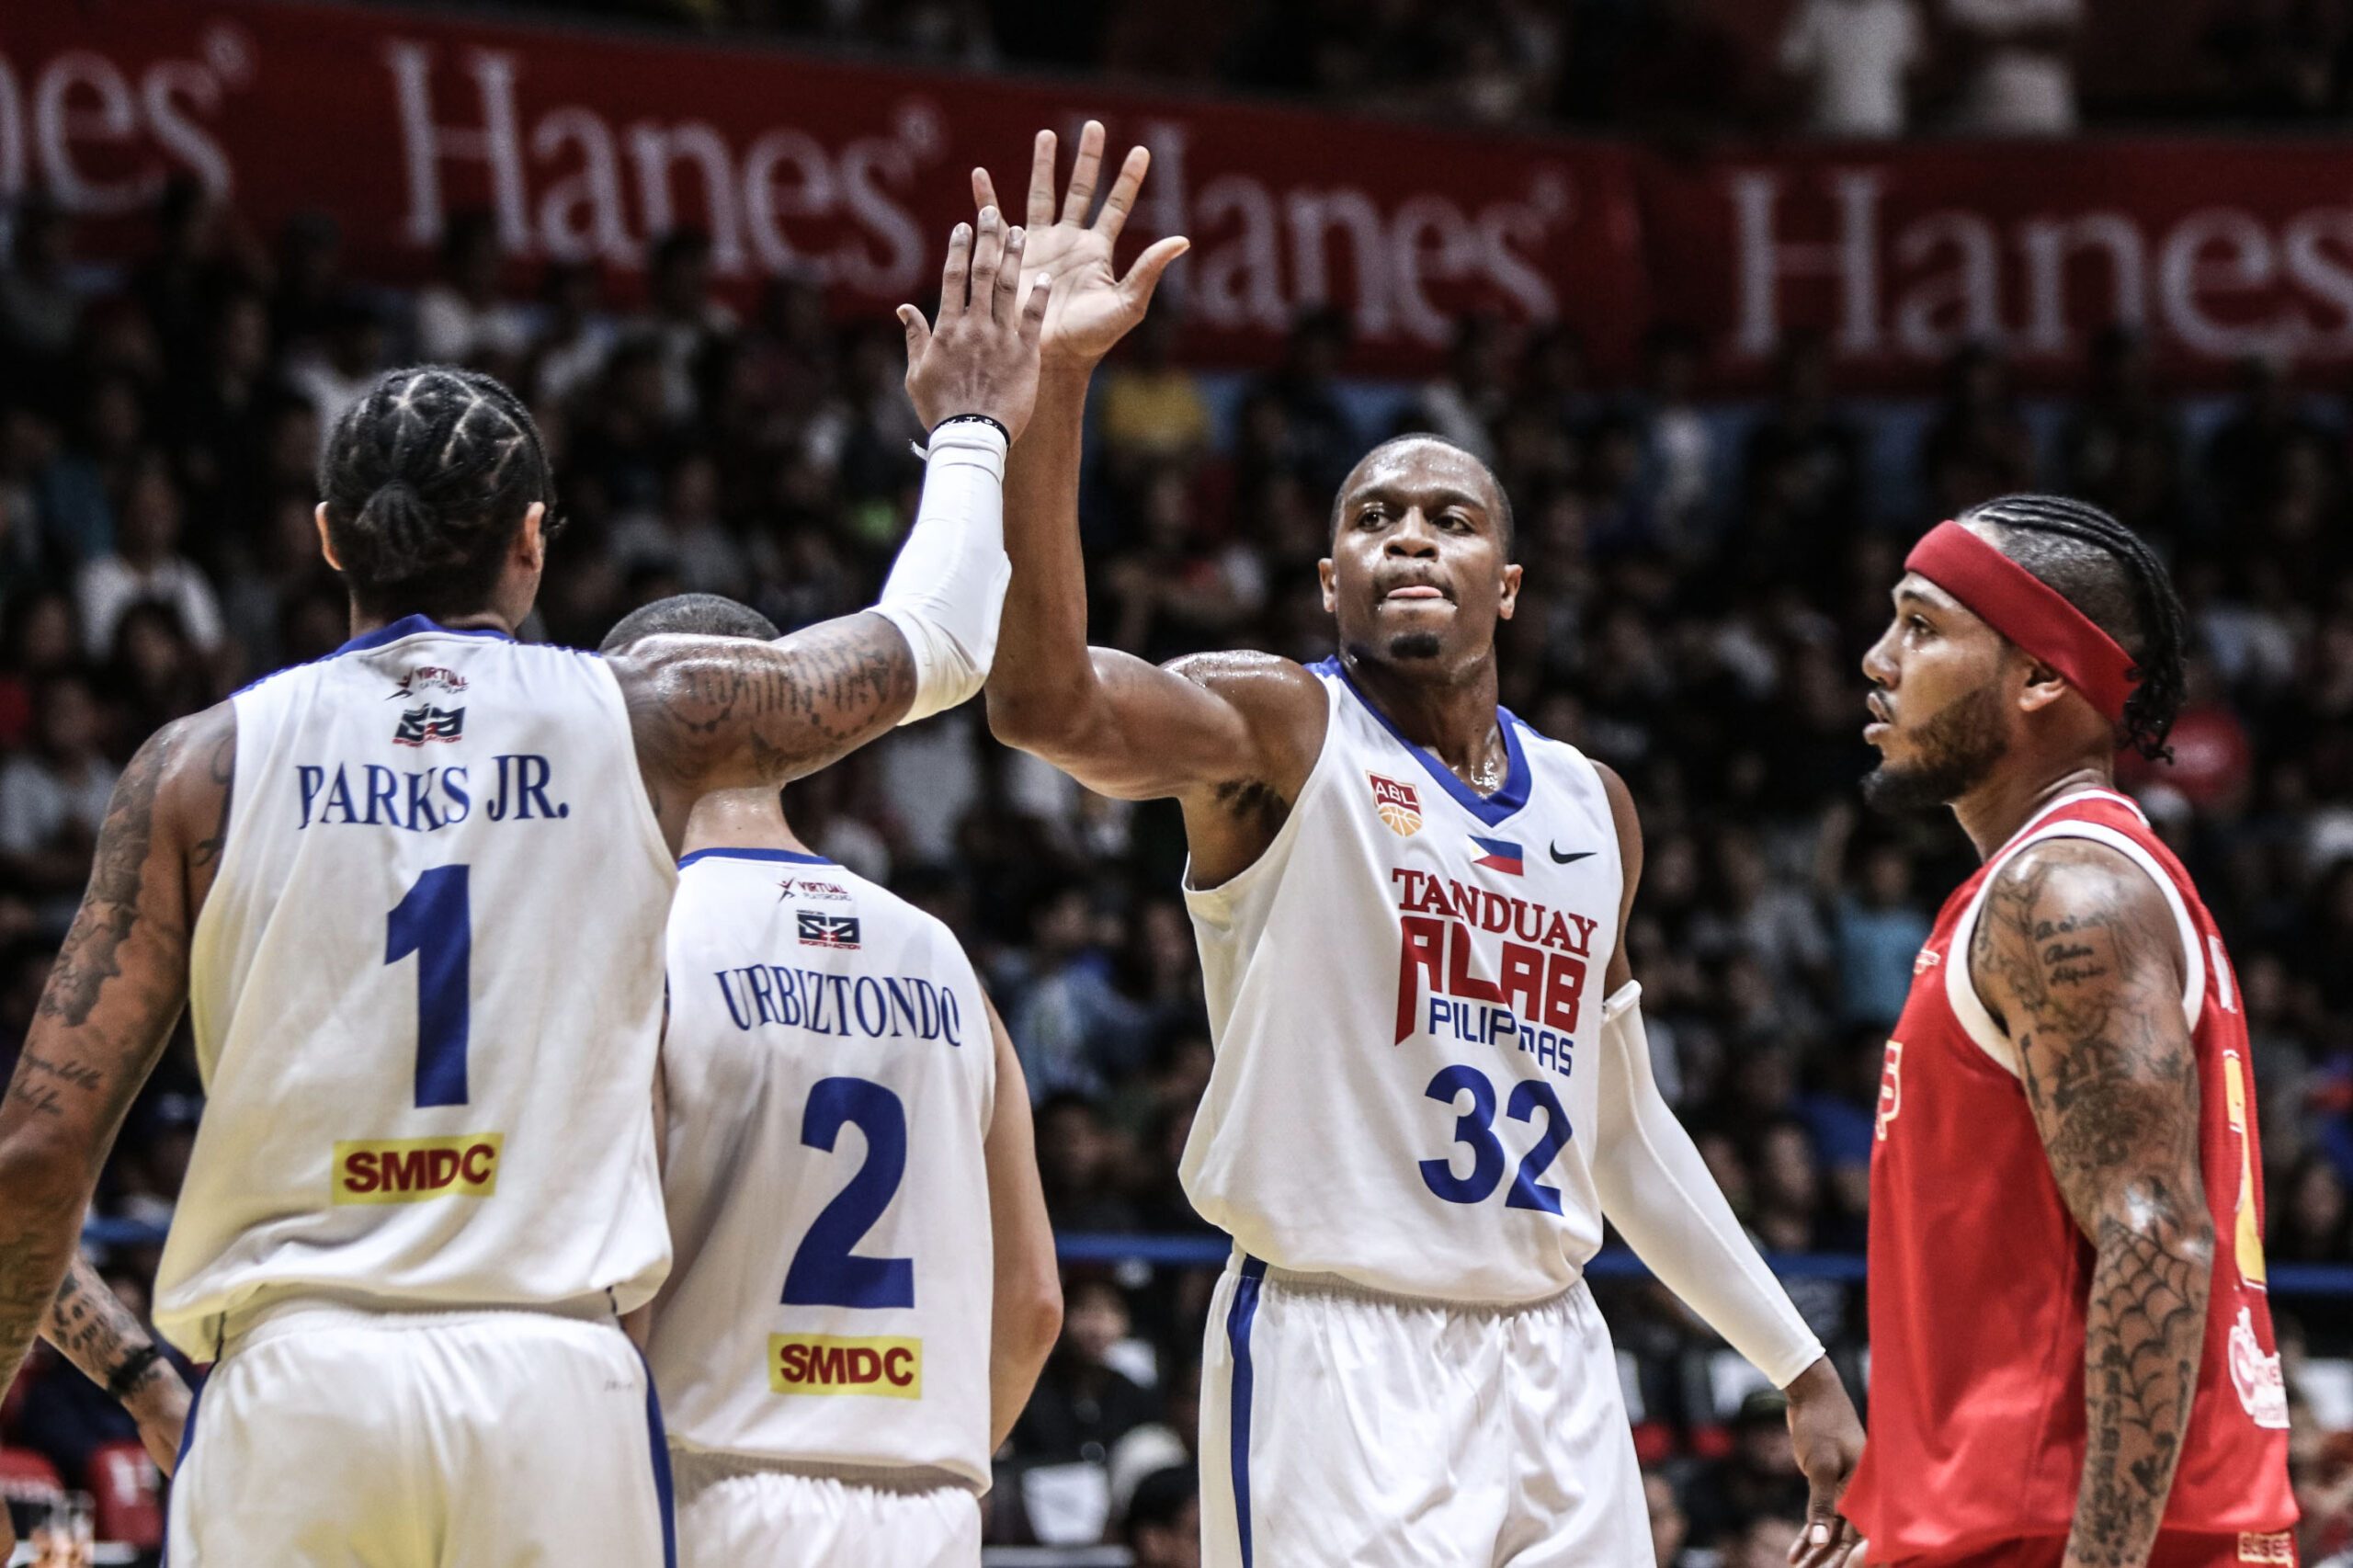 Alab Pilipinas bounces back big with lopsided victory over Mono Vampire